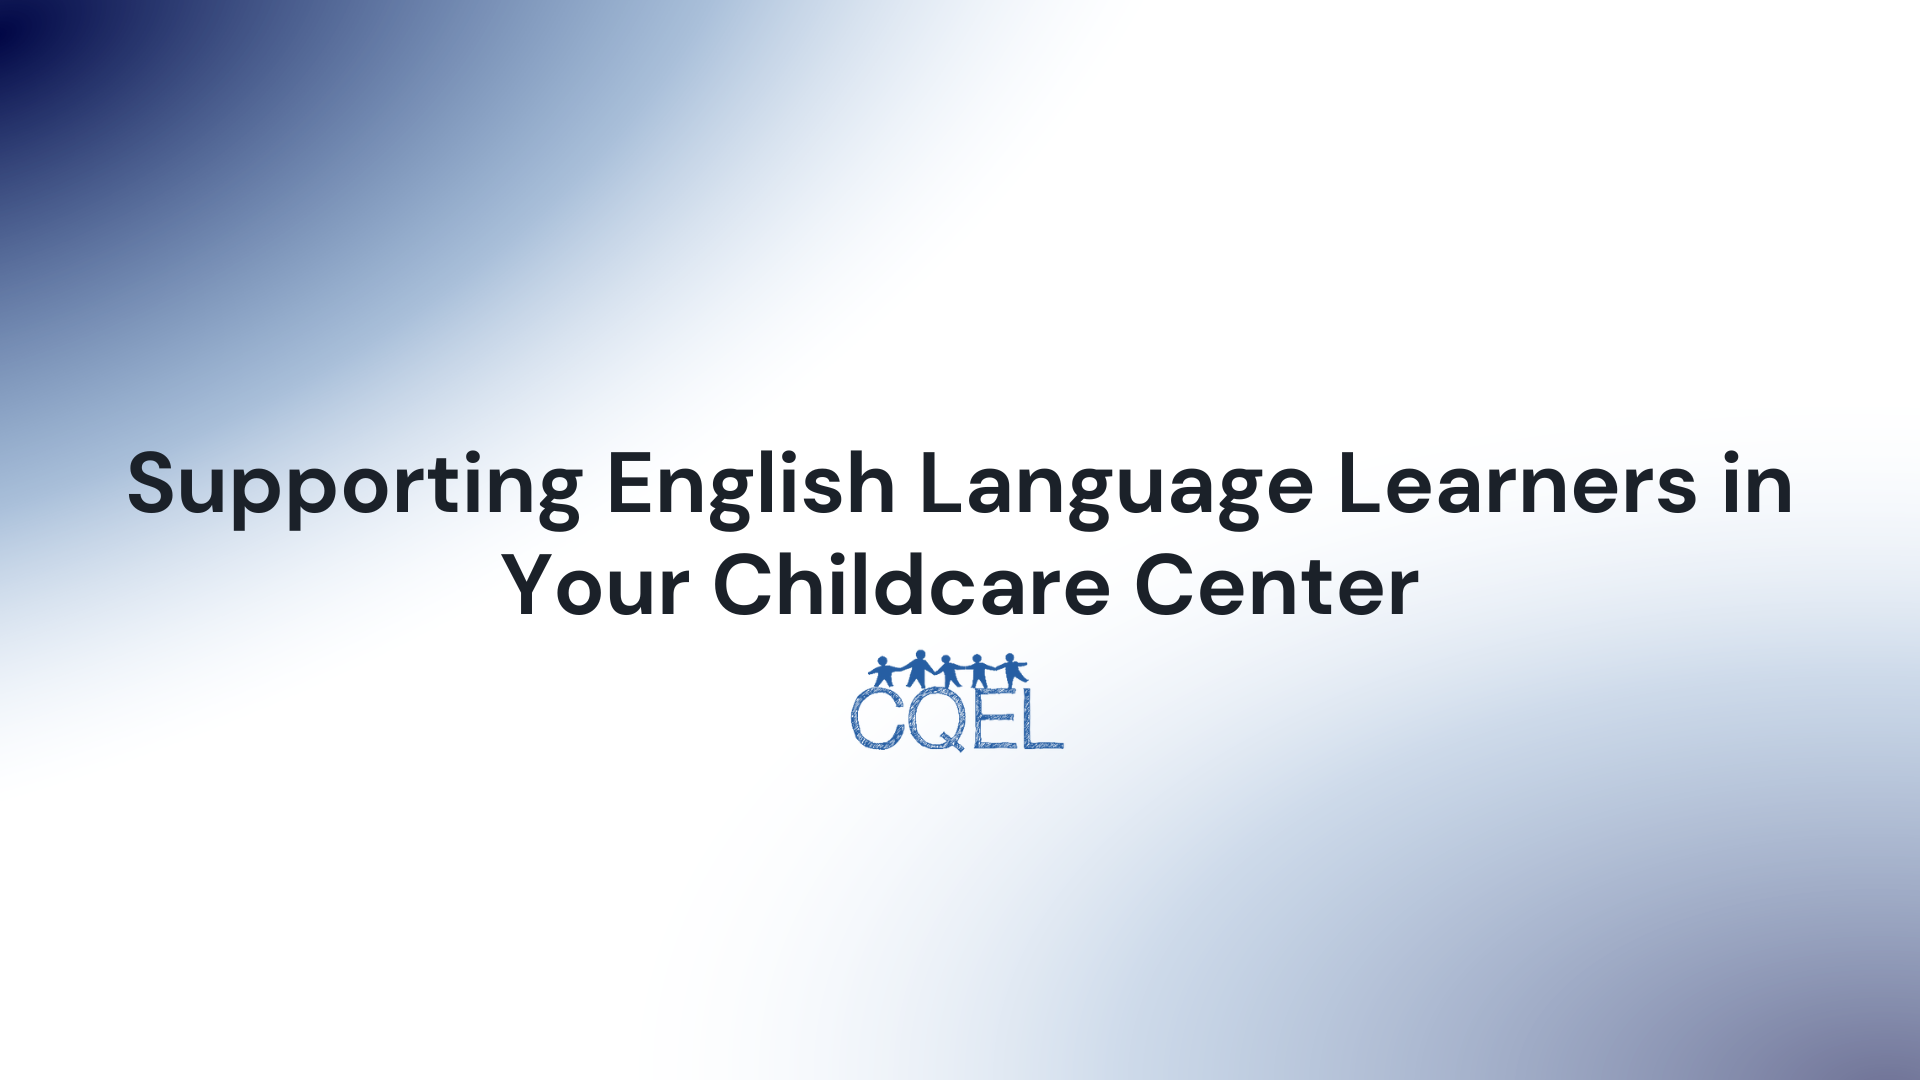 Supporting English Language Learners in Your Childcare Center